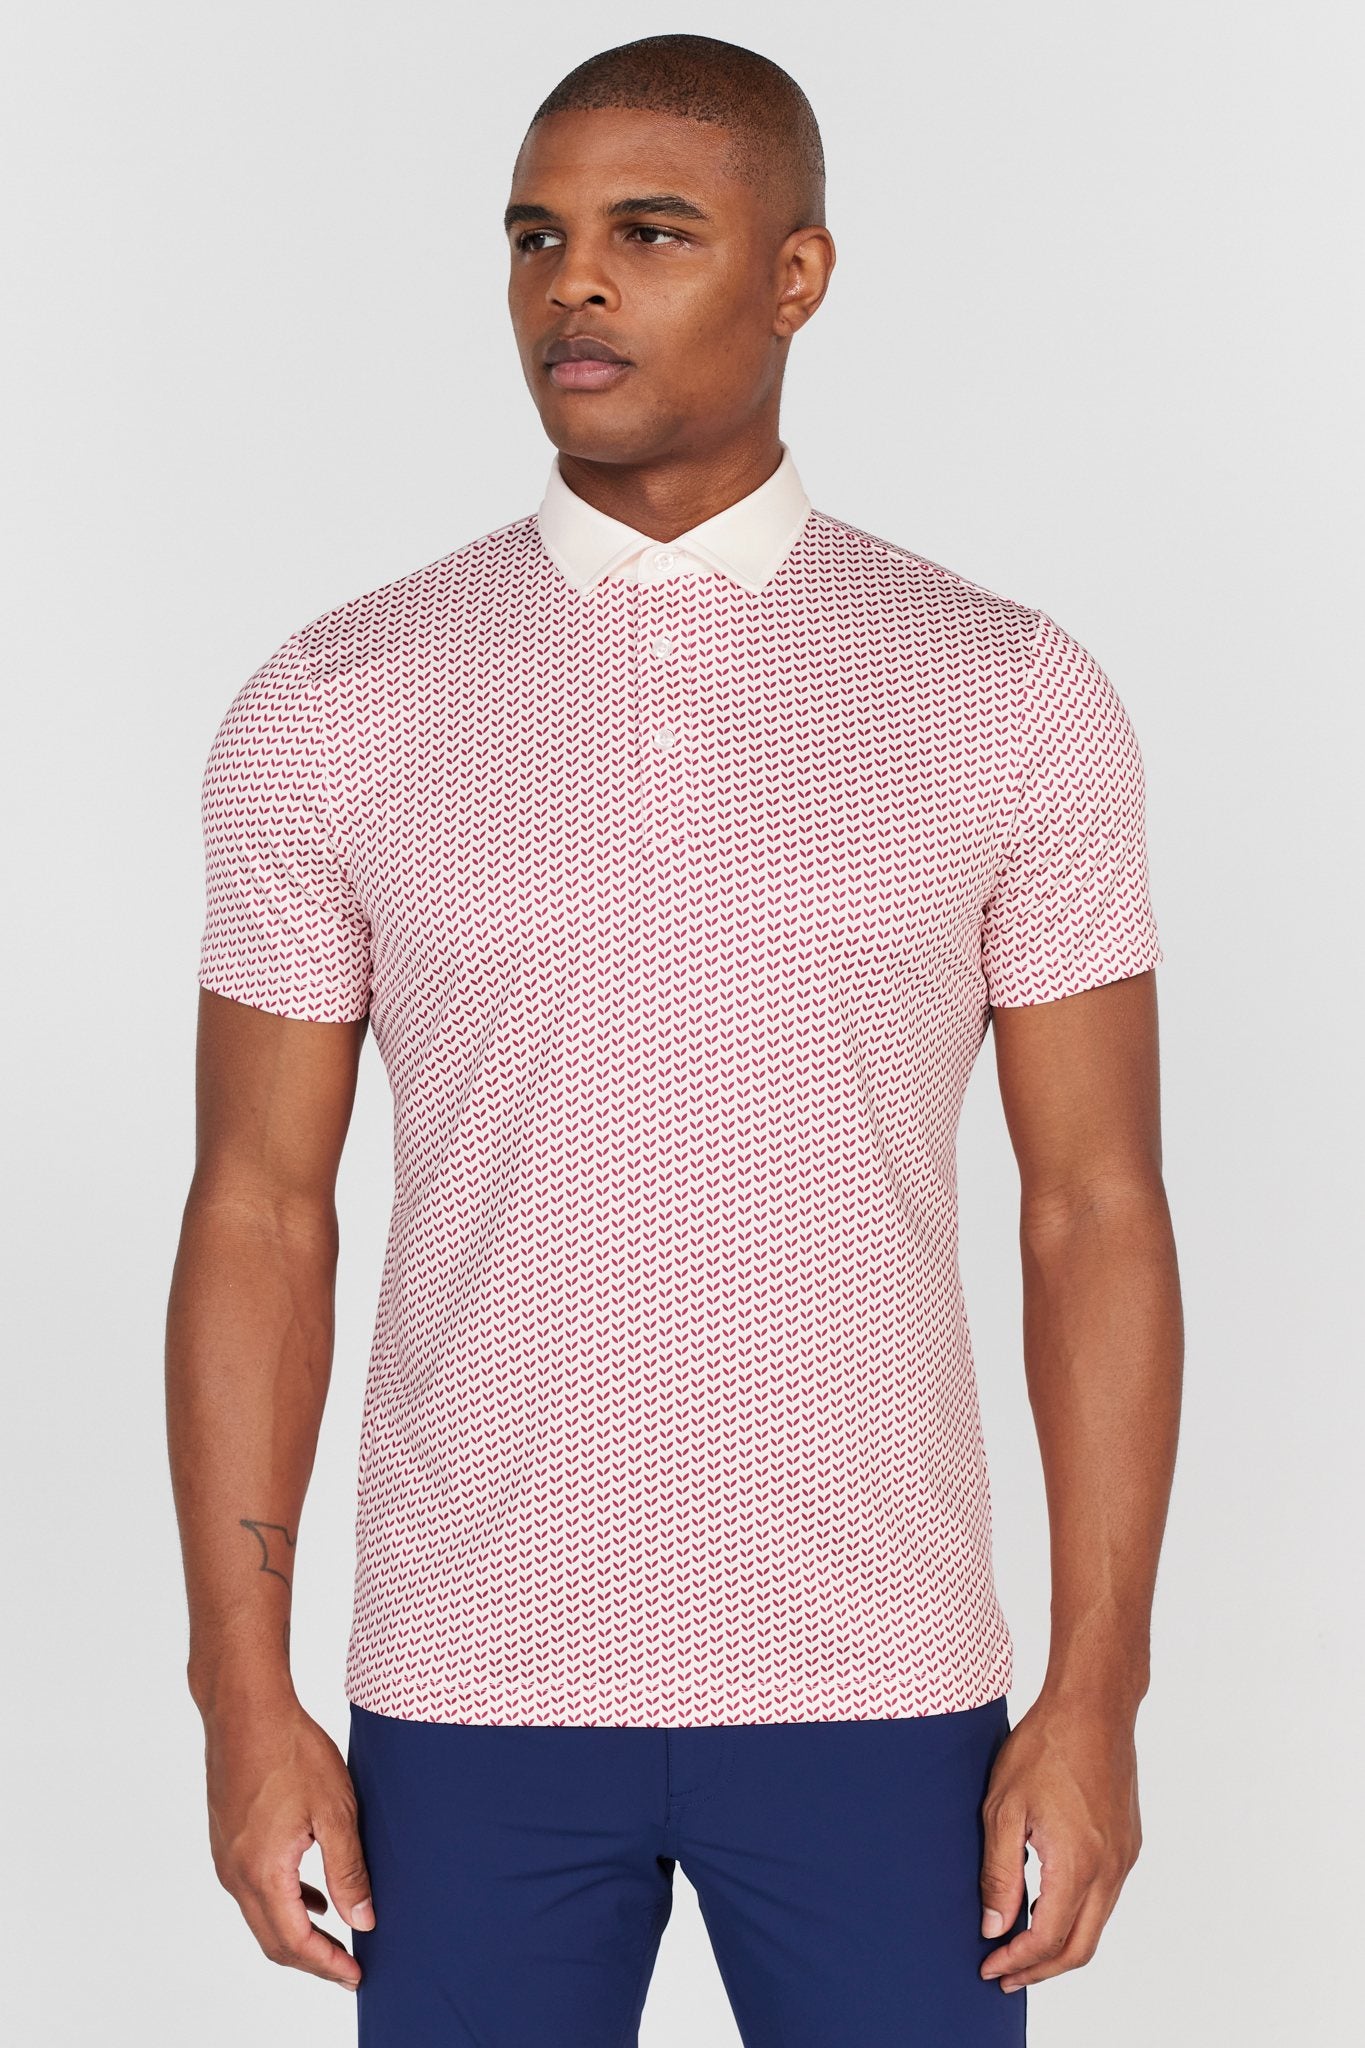 Deweil Polo in Petal Pink